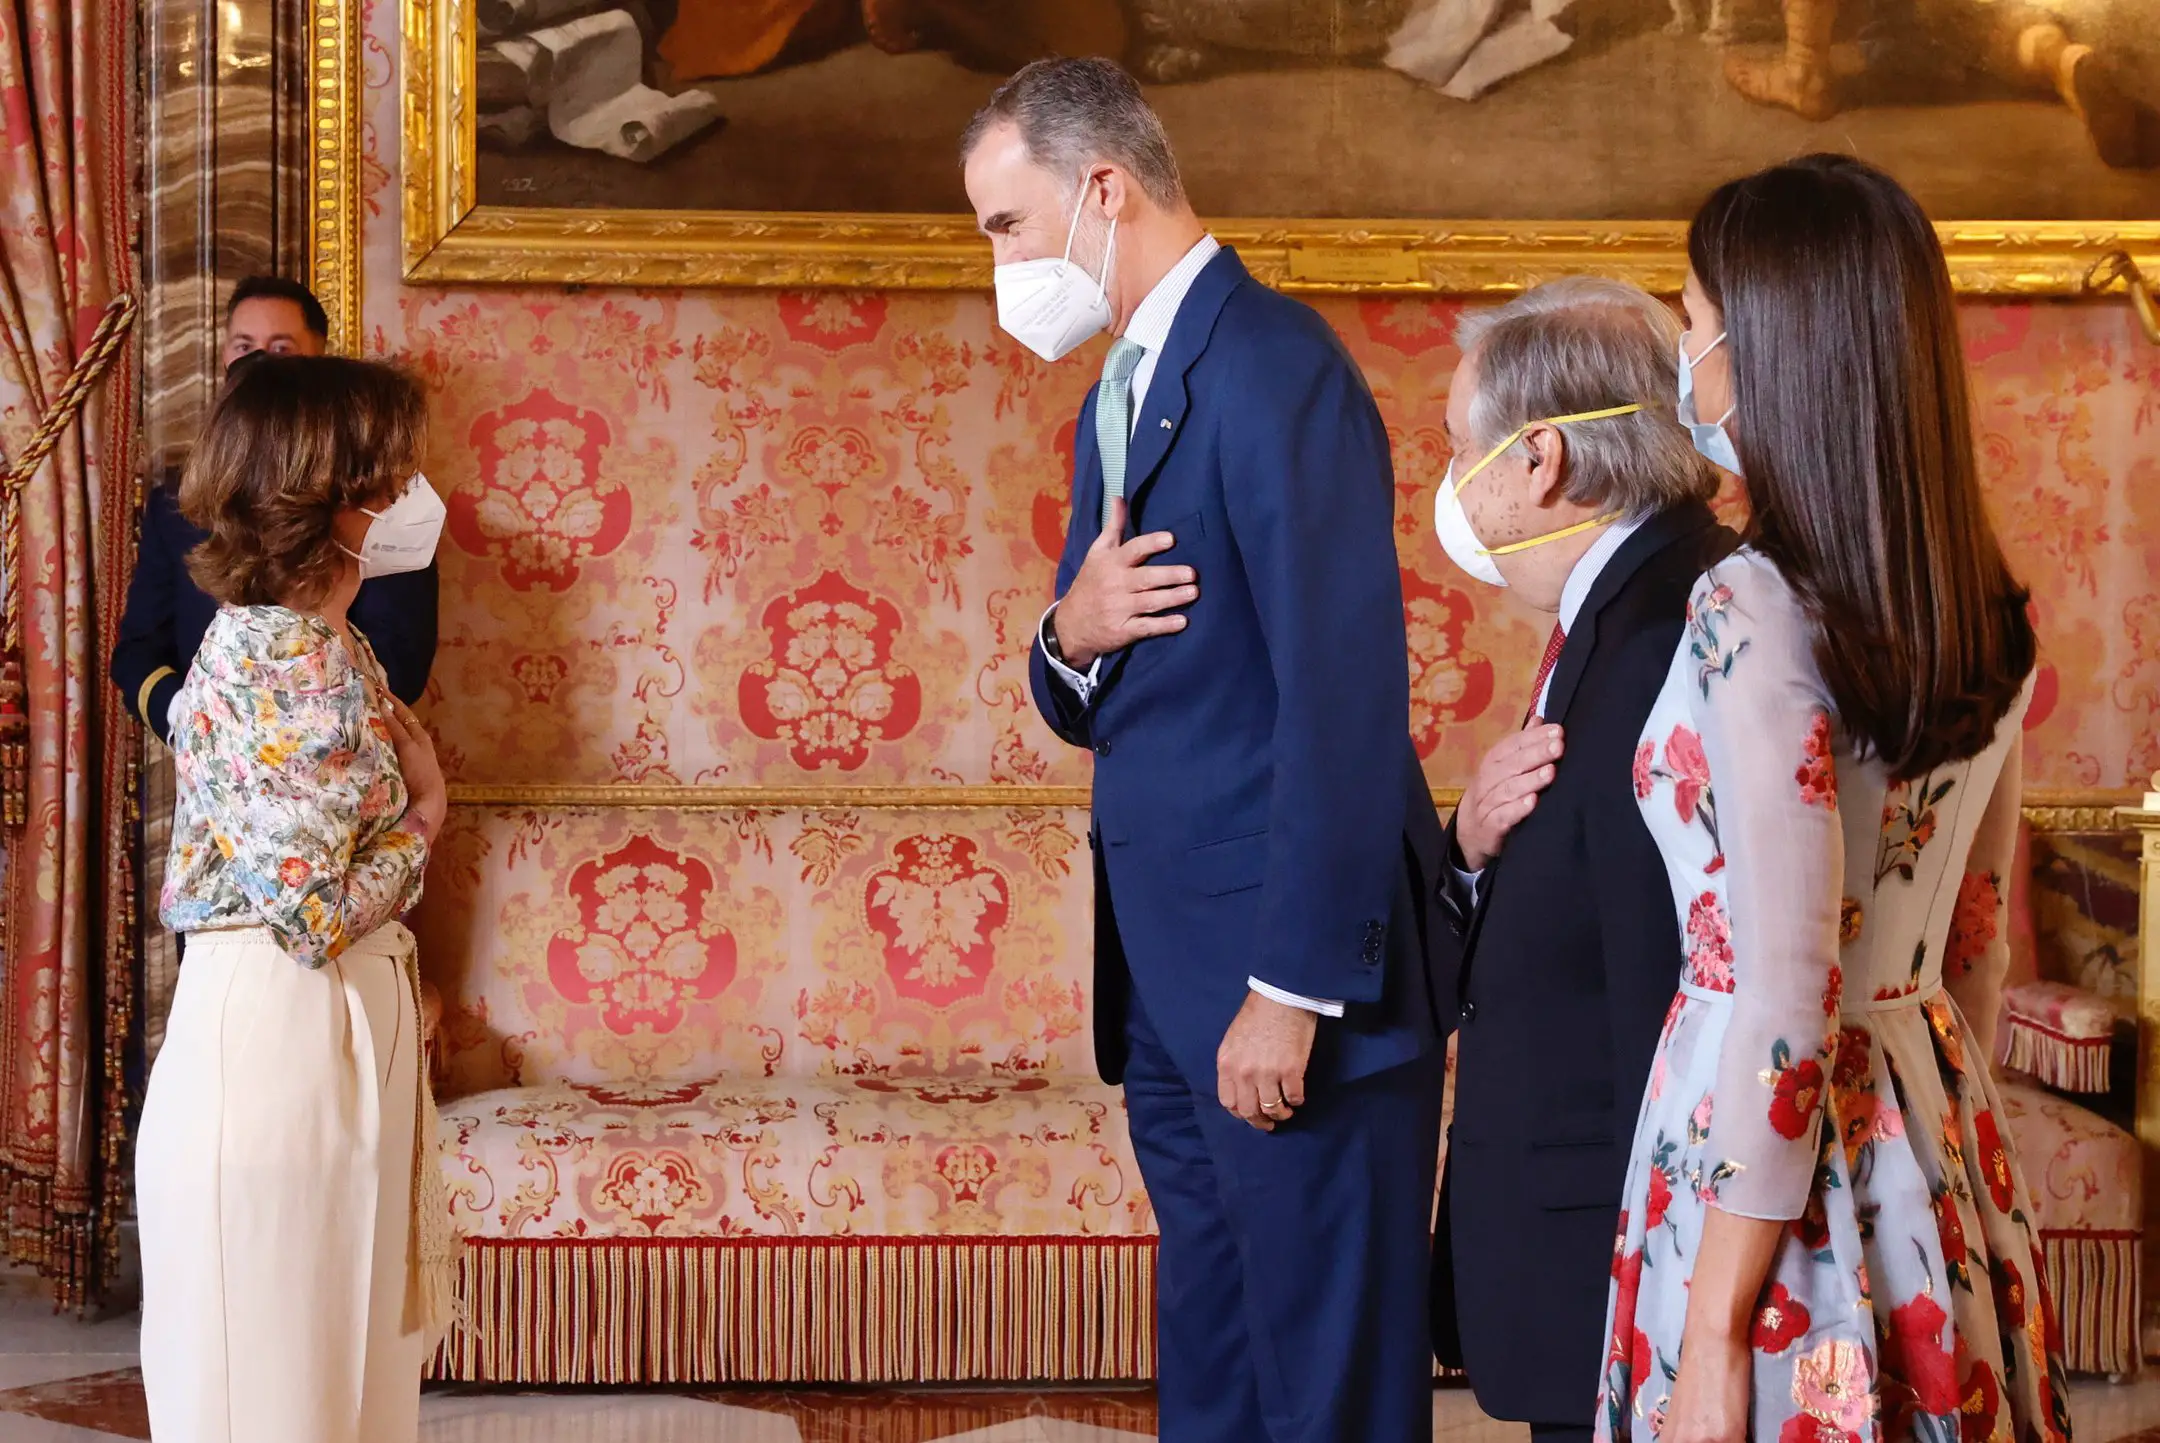 King Felipe and Queen Letizia of Spain offered a luncheon in honour of the Secretary-General of the United Nations, Mr António Guterrea at the Royal Palace of Madrid